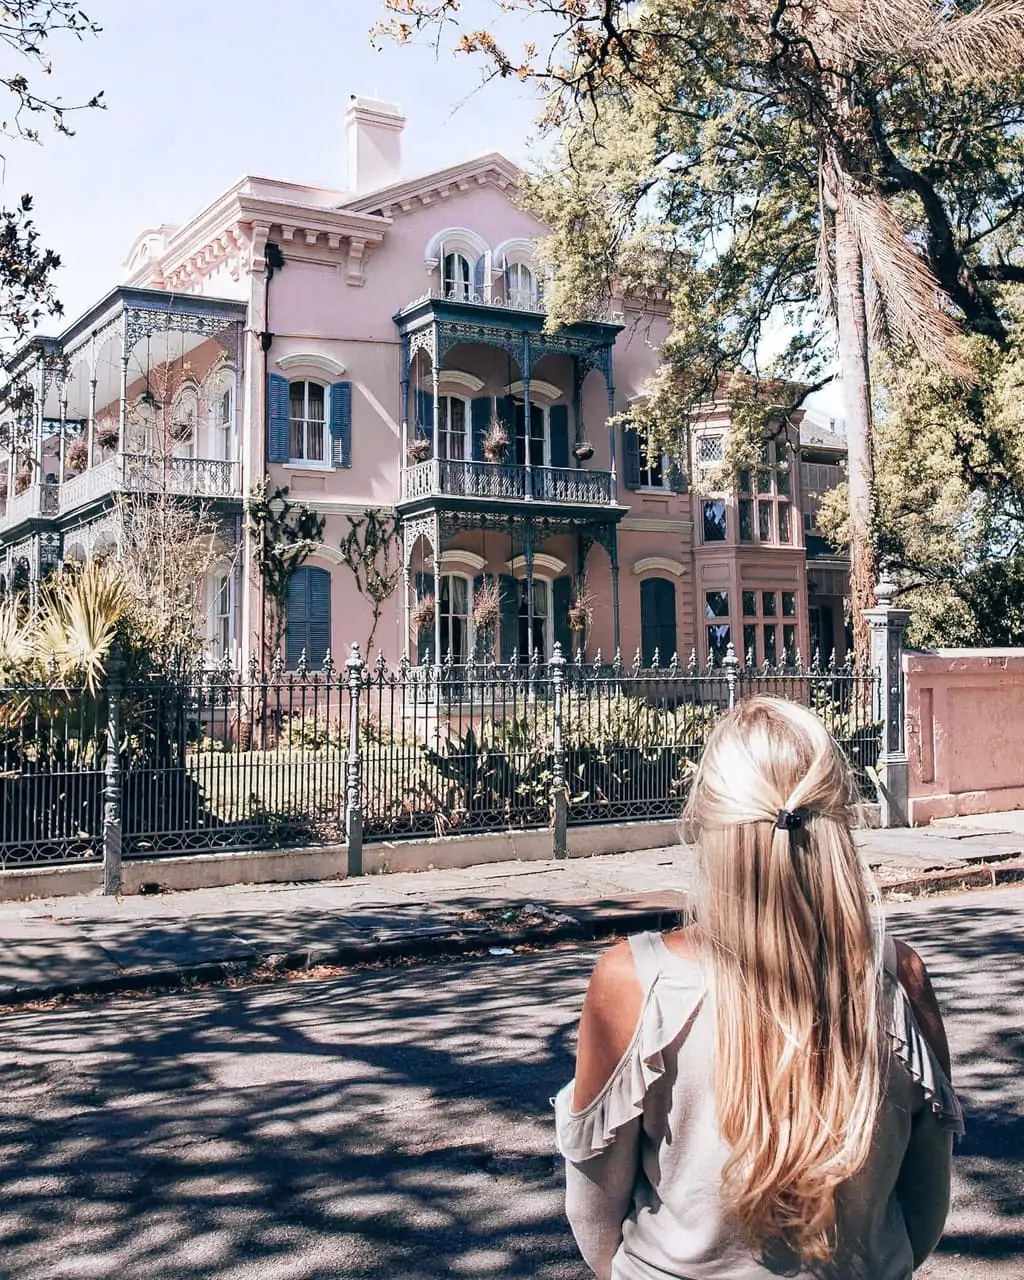 Blonde woman looking at a pink house in Garden District in New Orleans, Louisiana